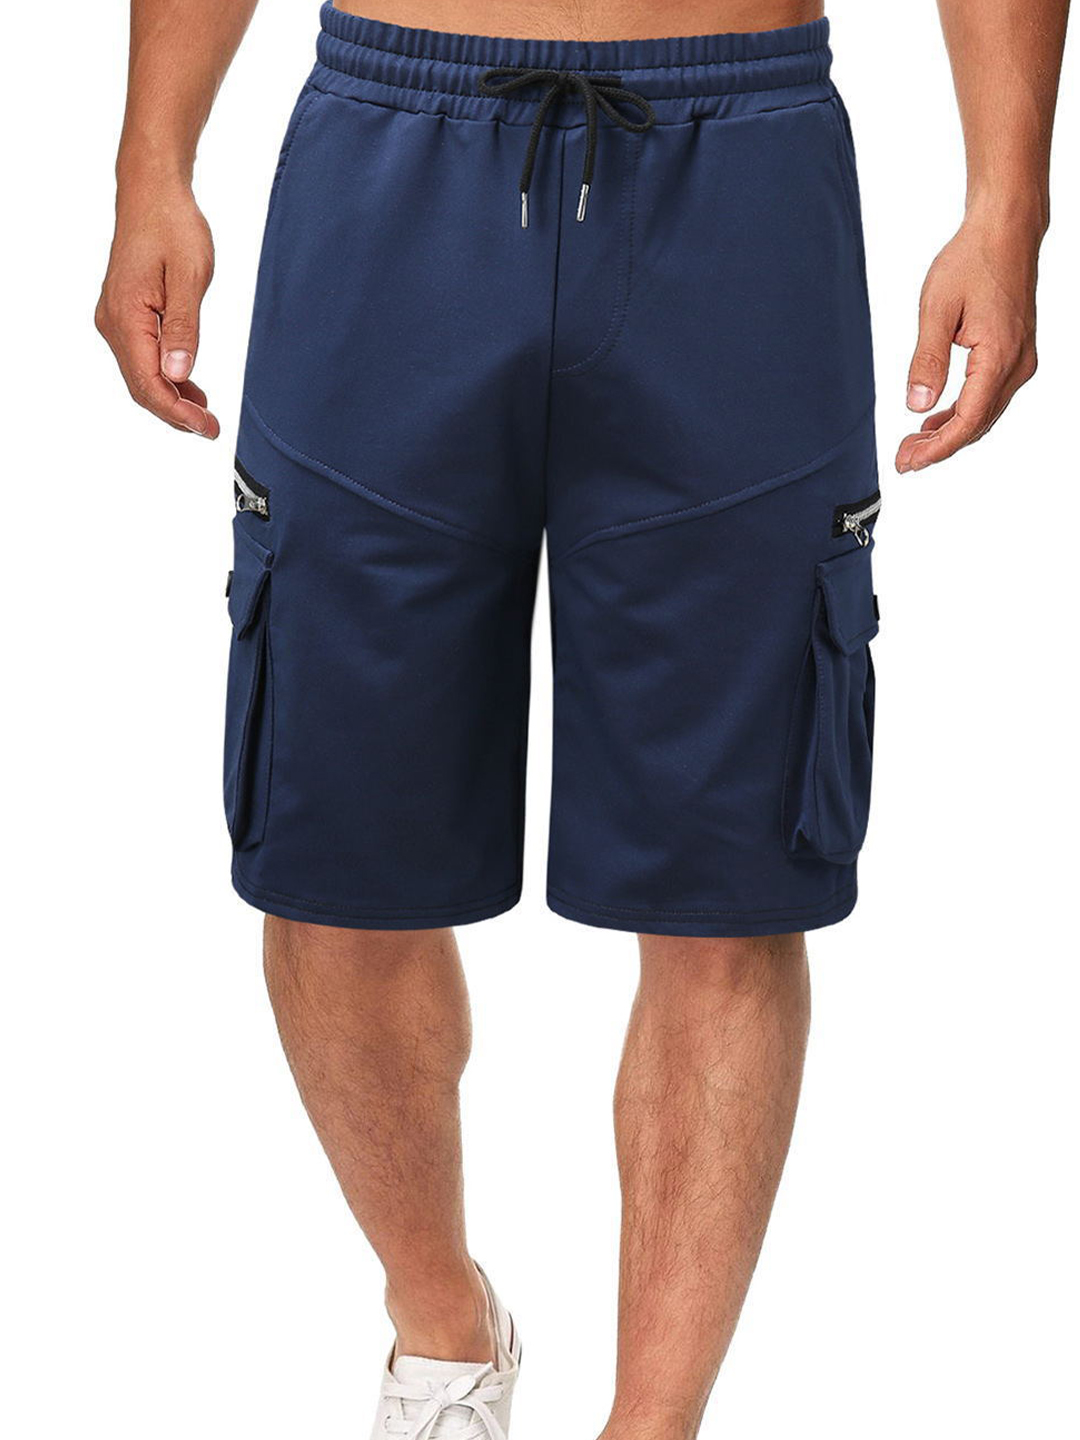 Men's Loose Casual Quick Drying Shorts